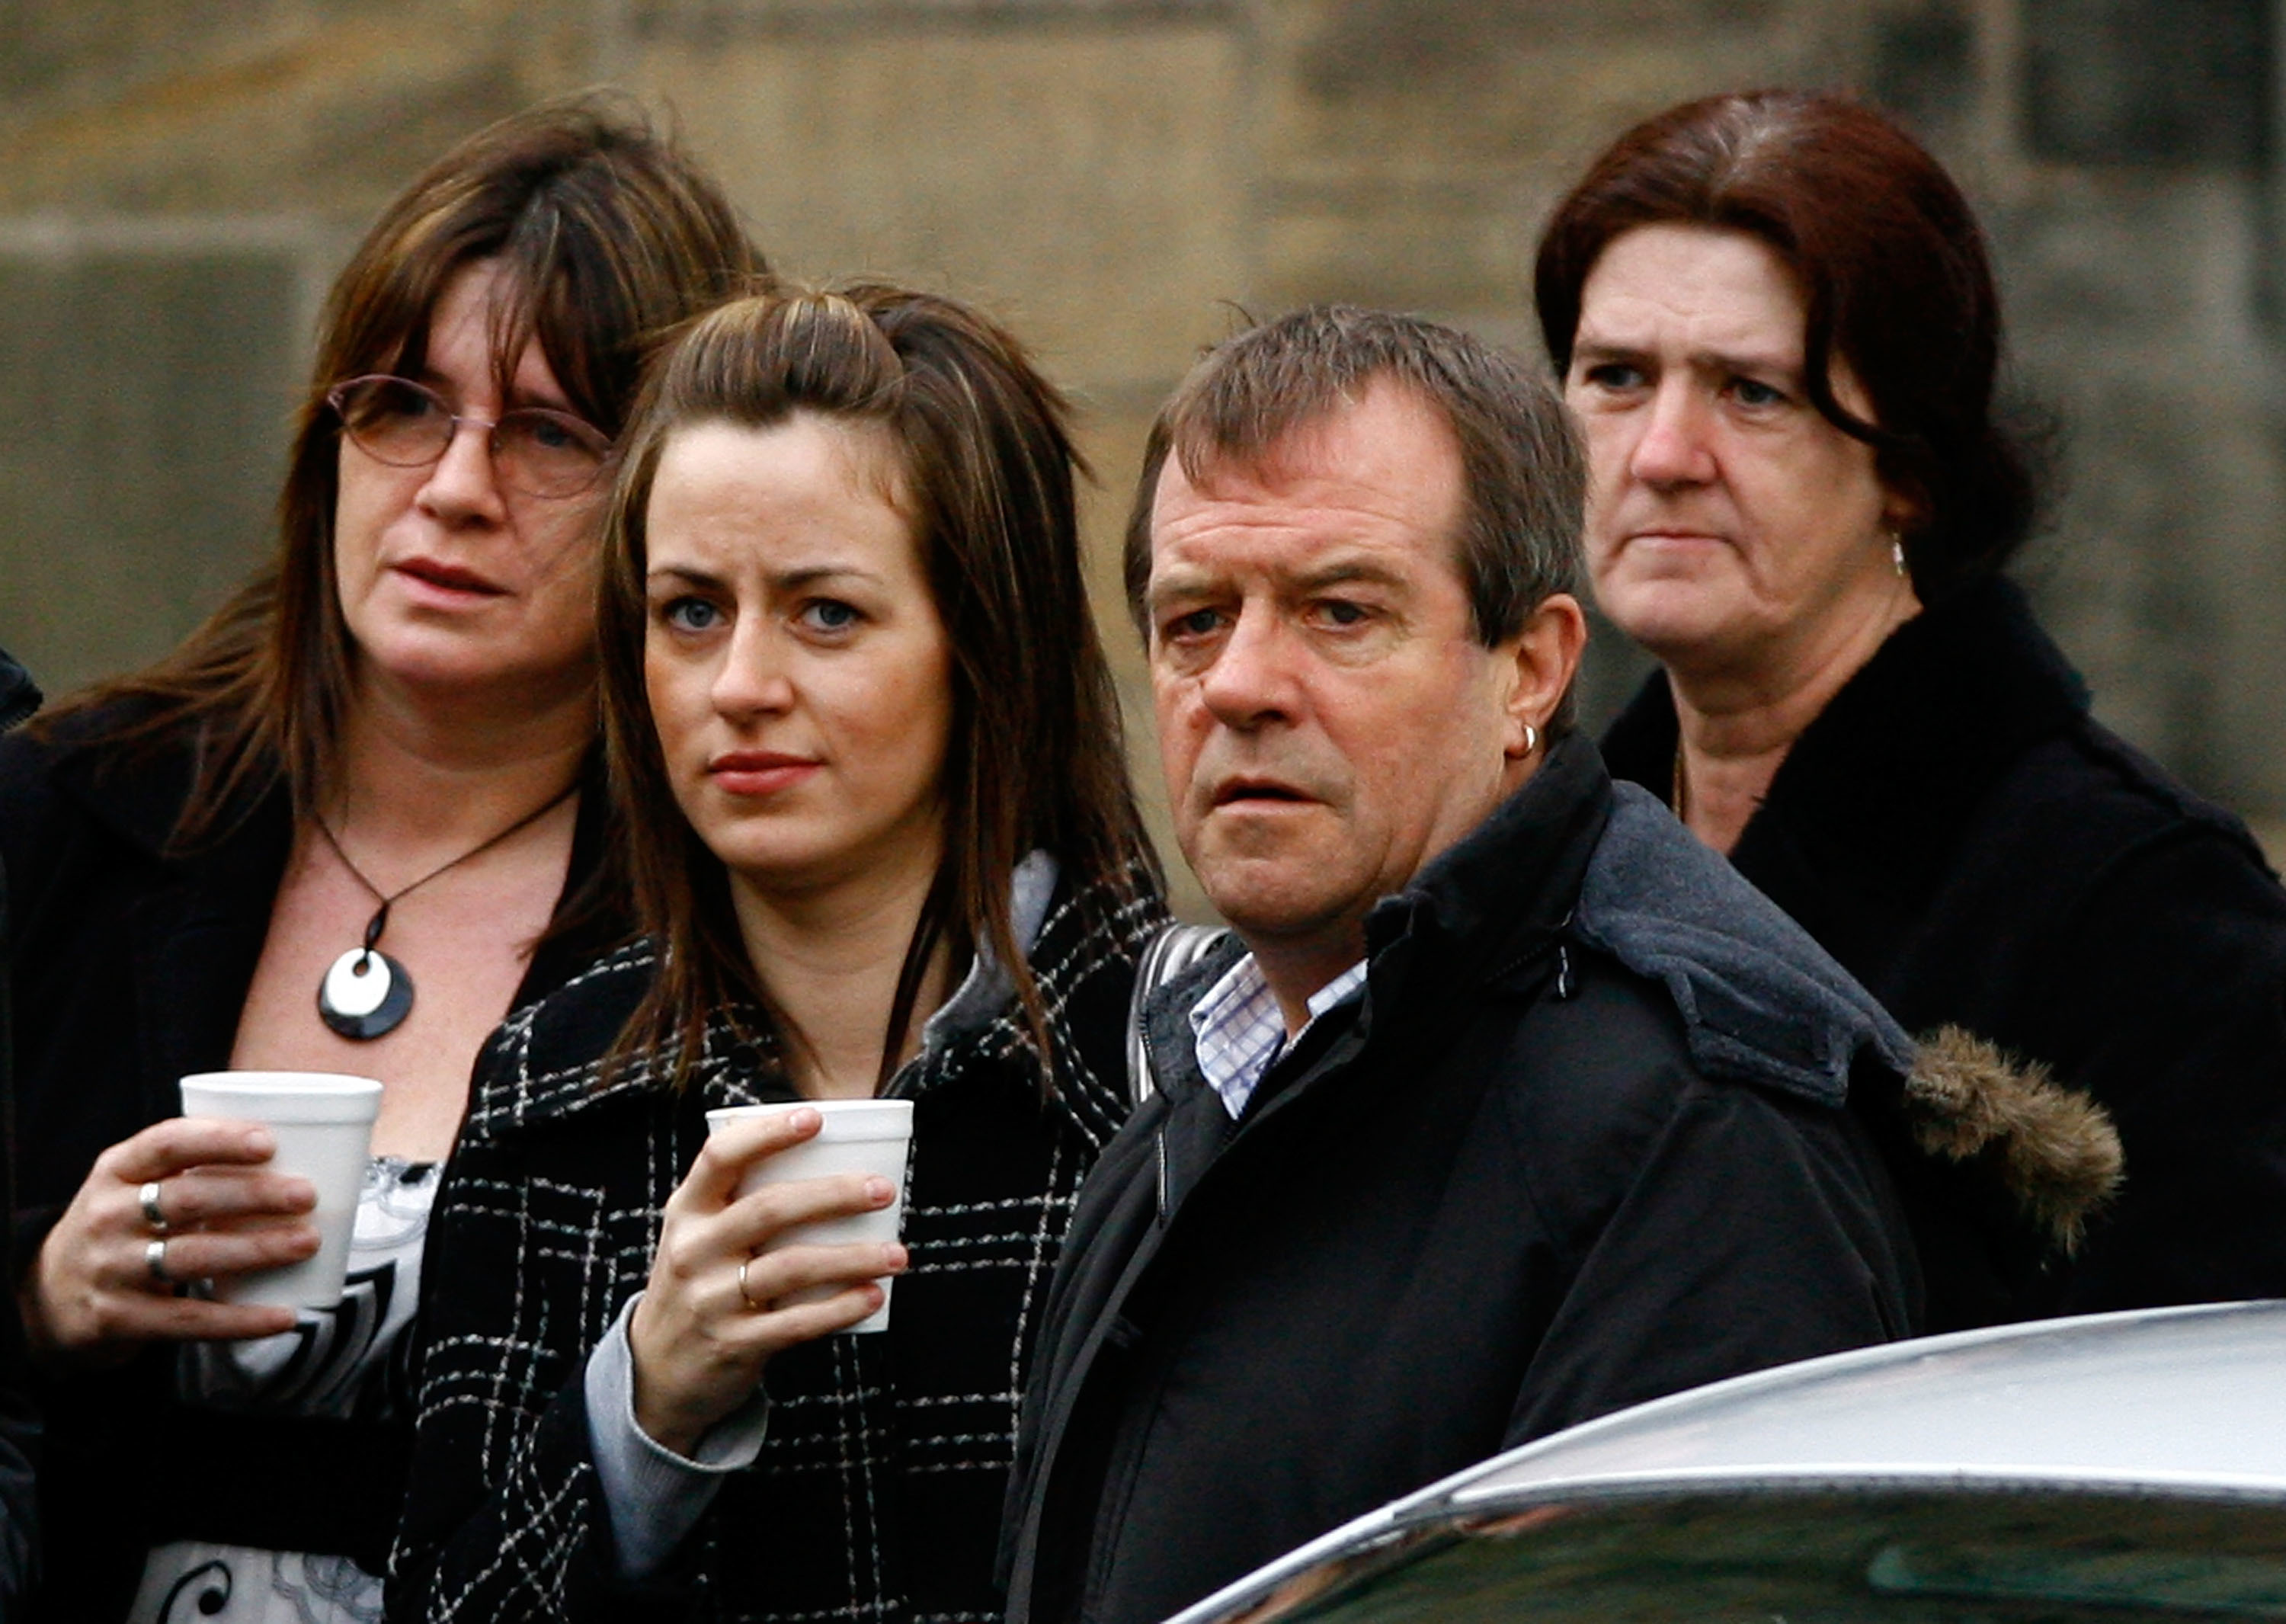 Michael Hamilton, father of Vicky, has hit out at what he sees as a sham by killer Peter Tobin. ( Jeff J Mitchell/Getty Images)